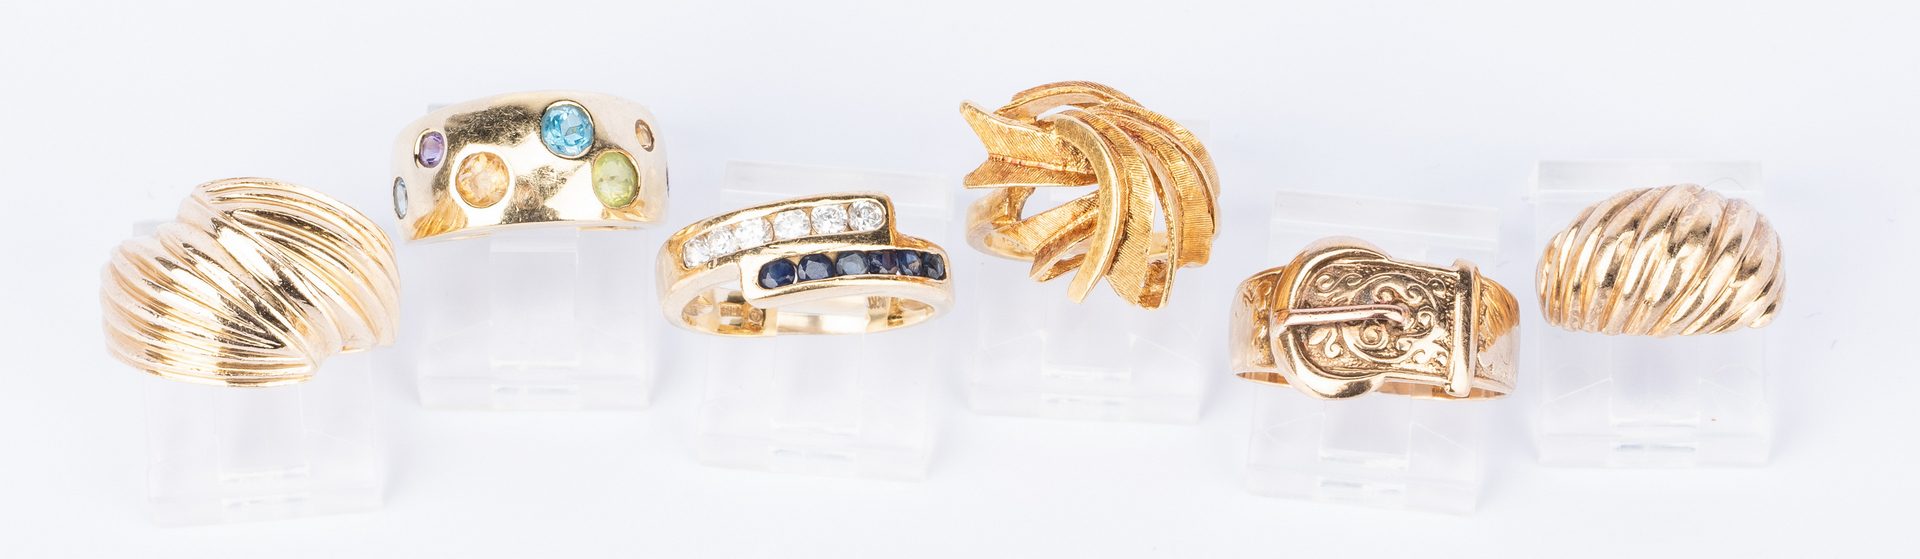 Lot 681: 6 Various Fashion and Vintage Gold Rings